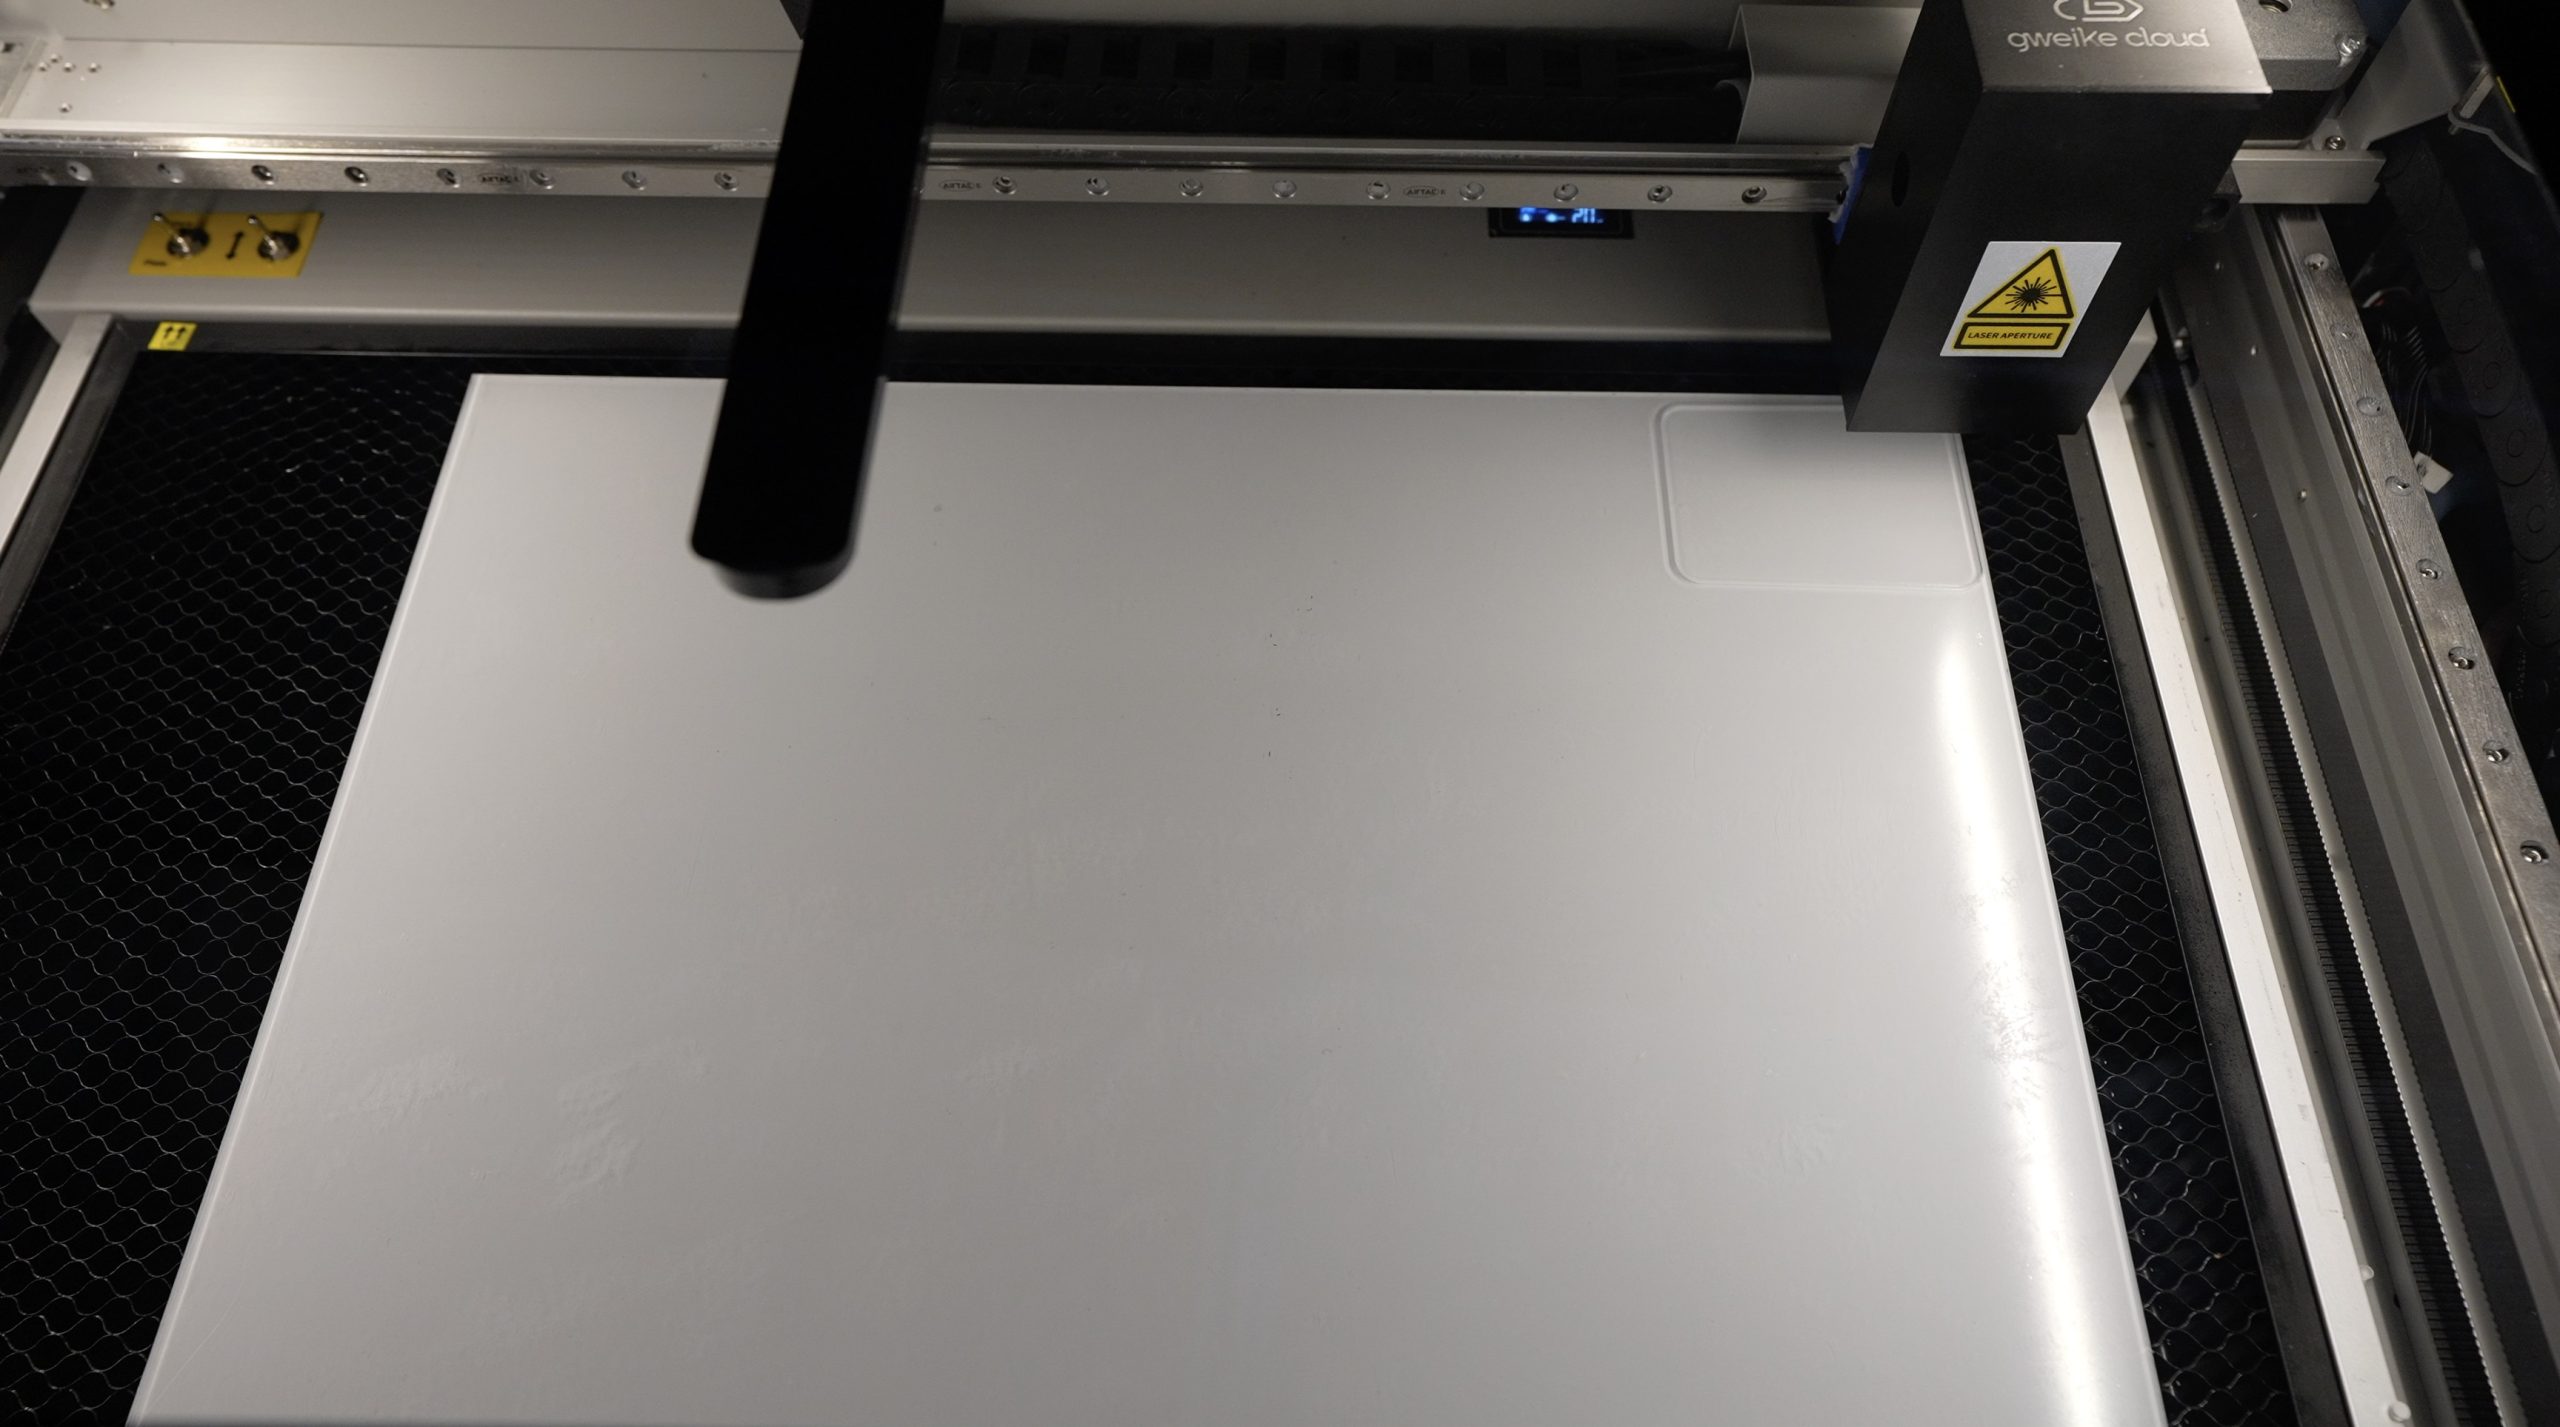 Laser Cutting Front Panel - The DIY Life